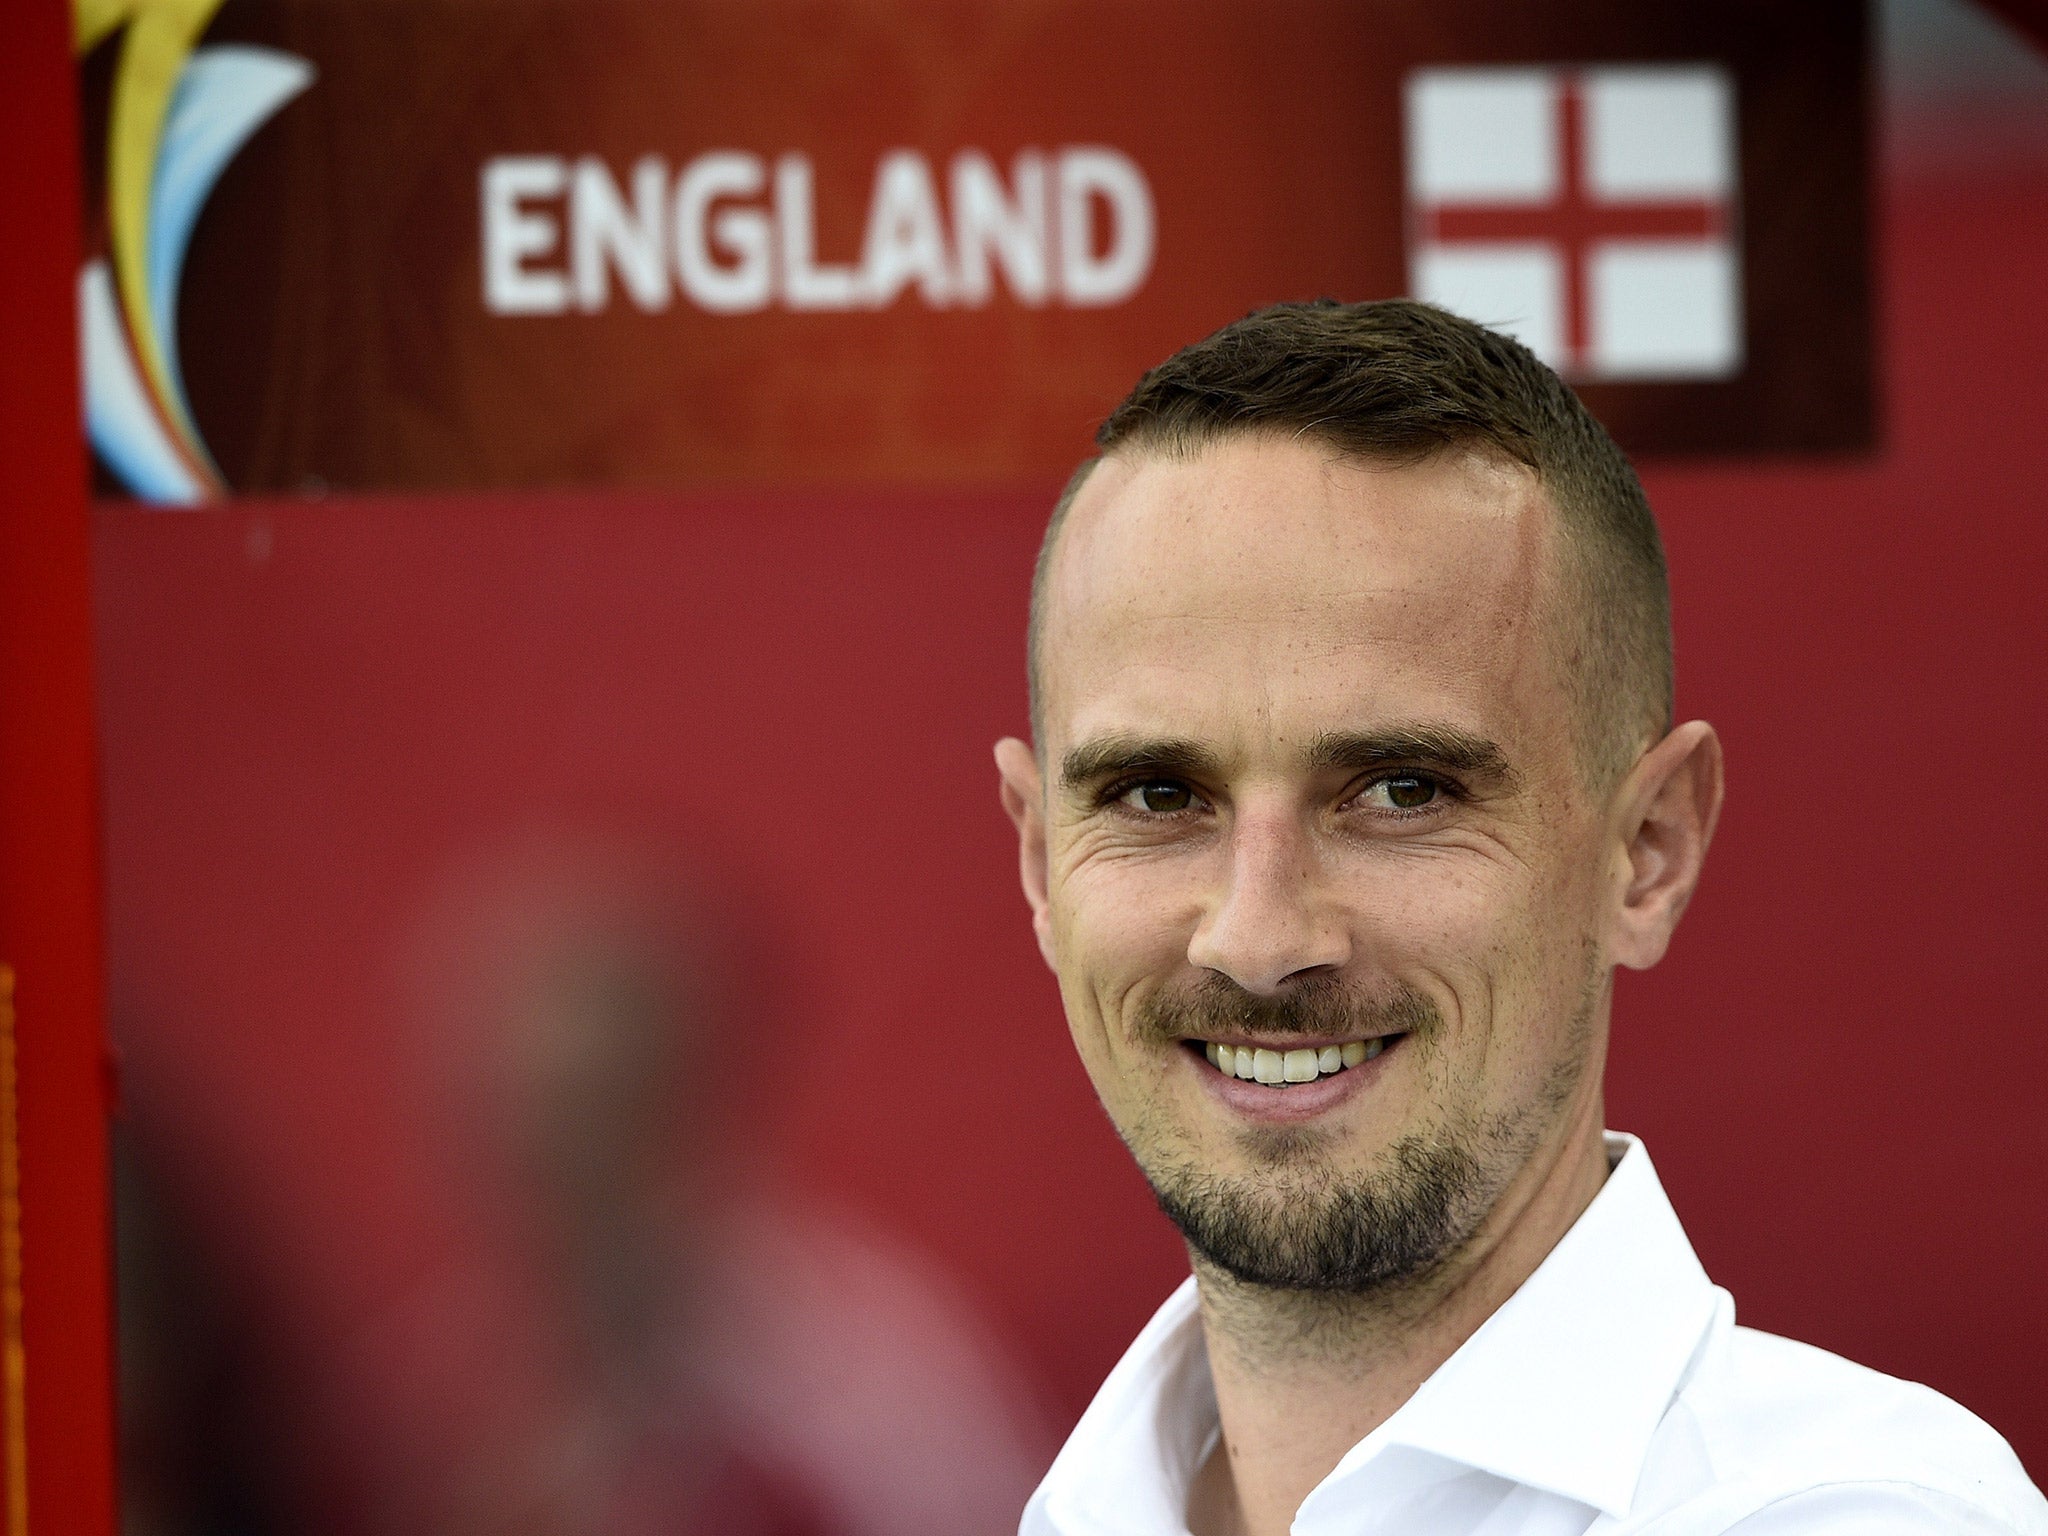 England head coach Mark Sampson wants to see his players exploit the size and strength advantages they have over their Japanese opponents (Getty)